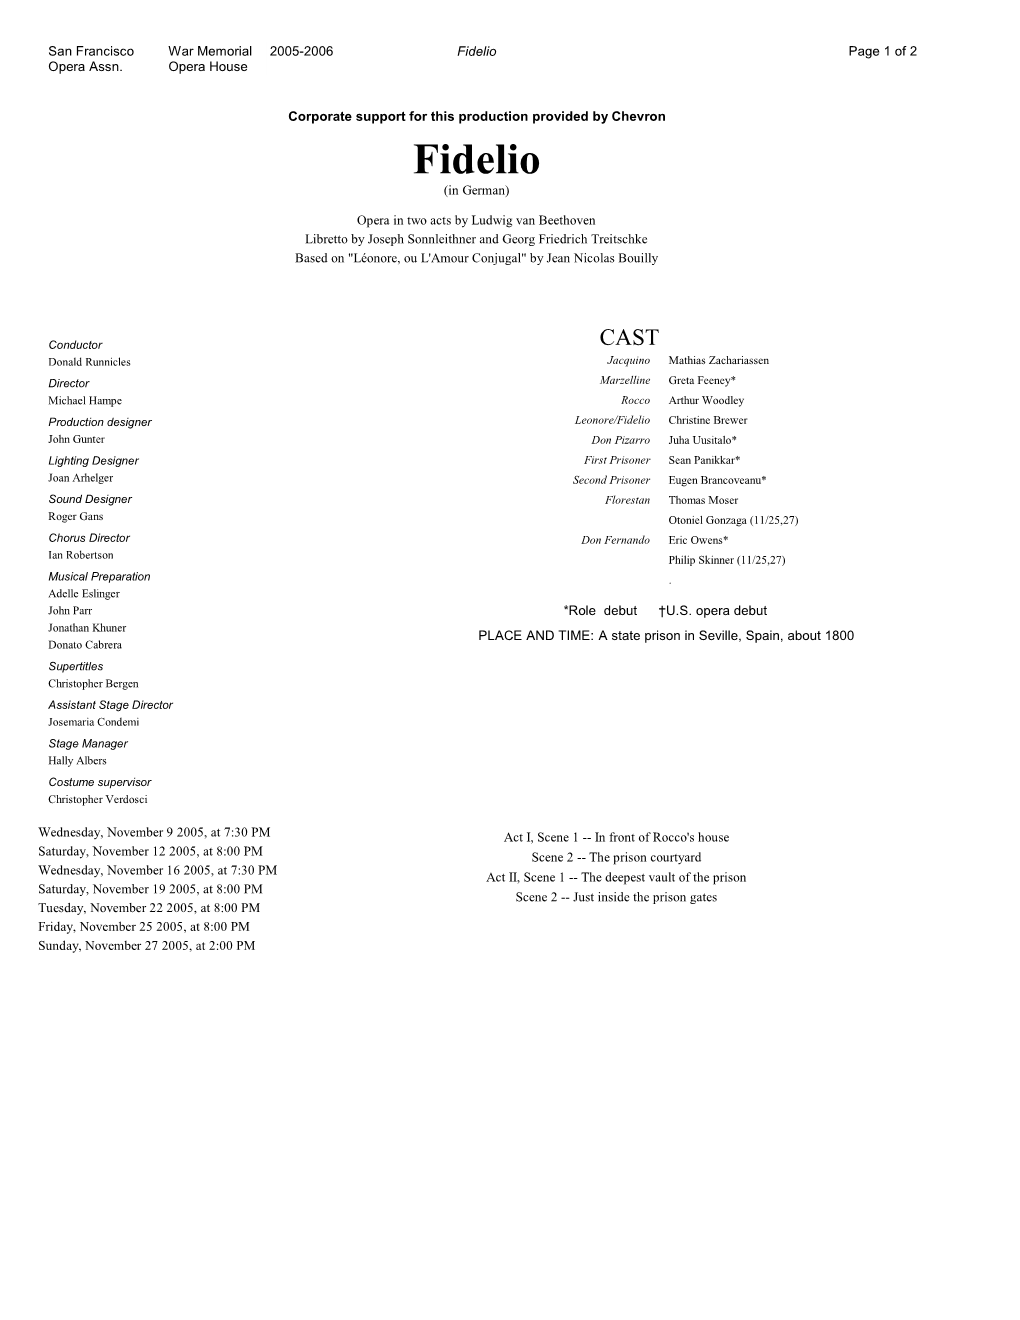 Fidelio Page 1 of 2 Opera Assn